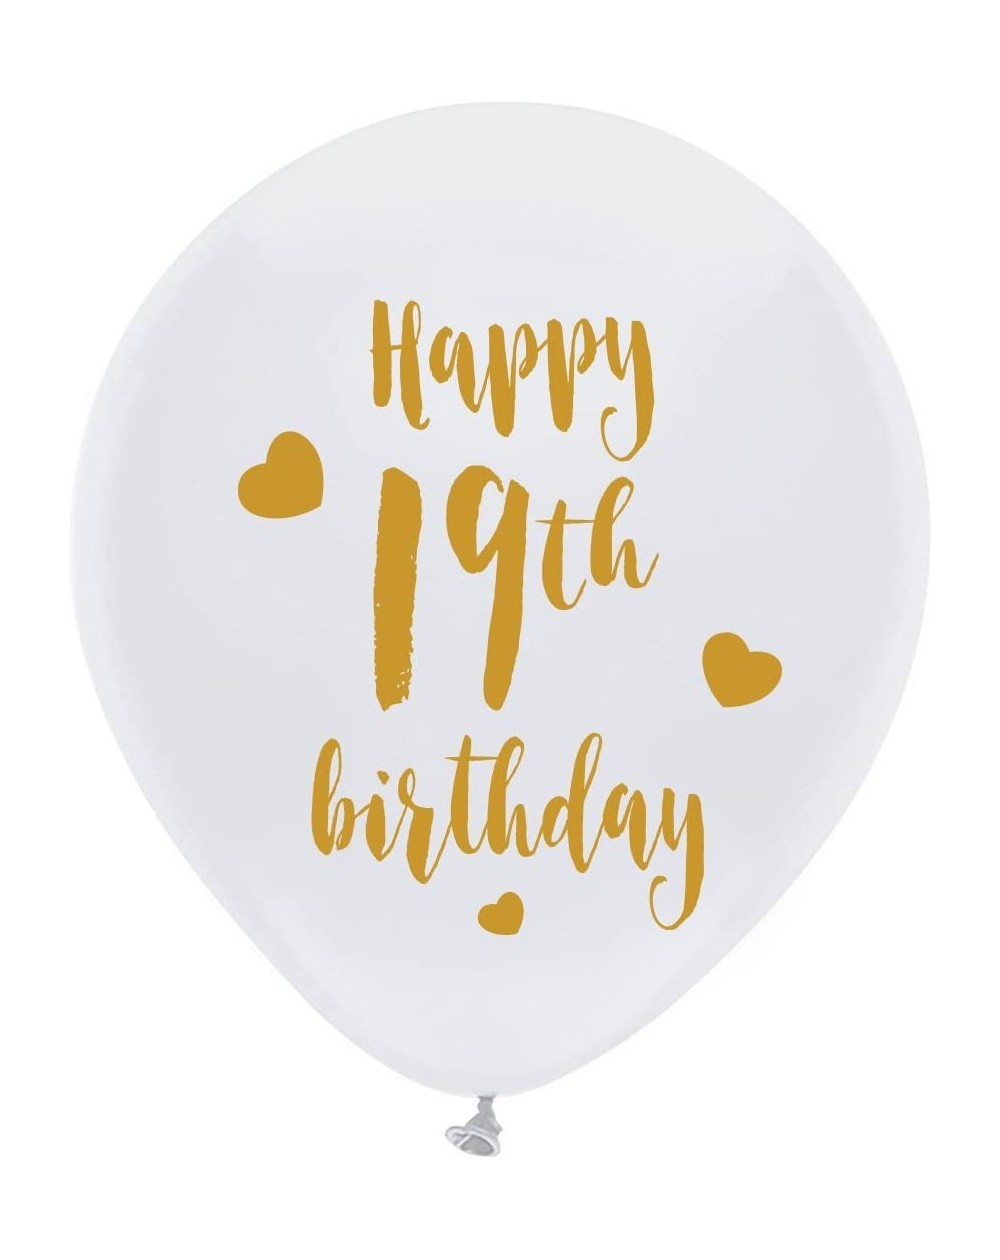 Balloons Whtie 19th Birthday Latex Balloons- 12inch (16pcs) Girl Boy Gold Happy 19th Birthday Party Decorations Supplies - C1...